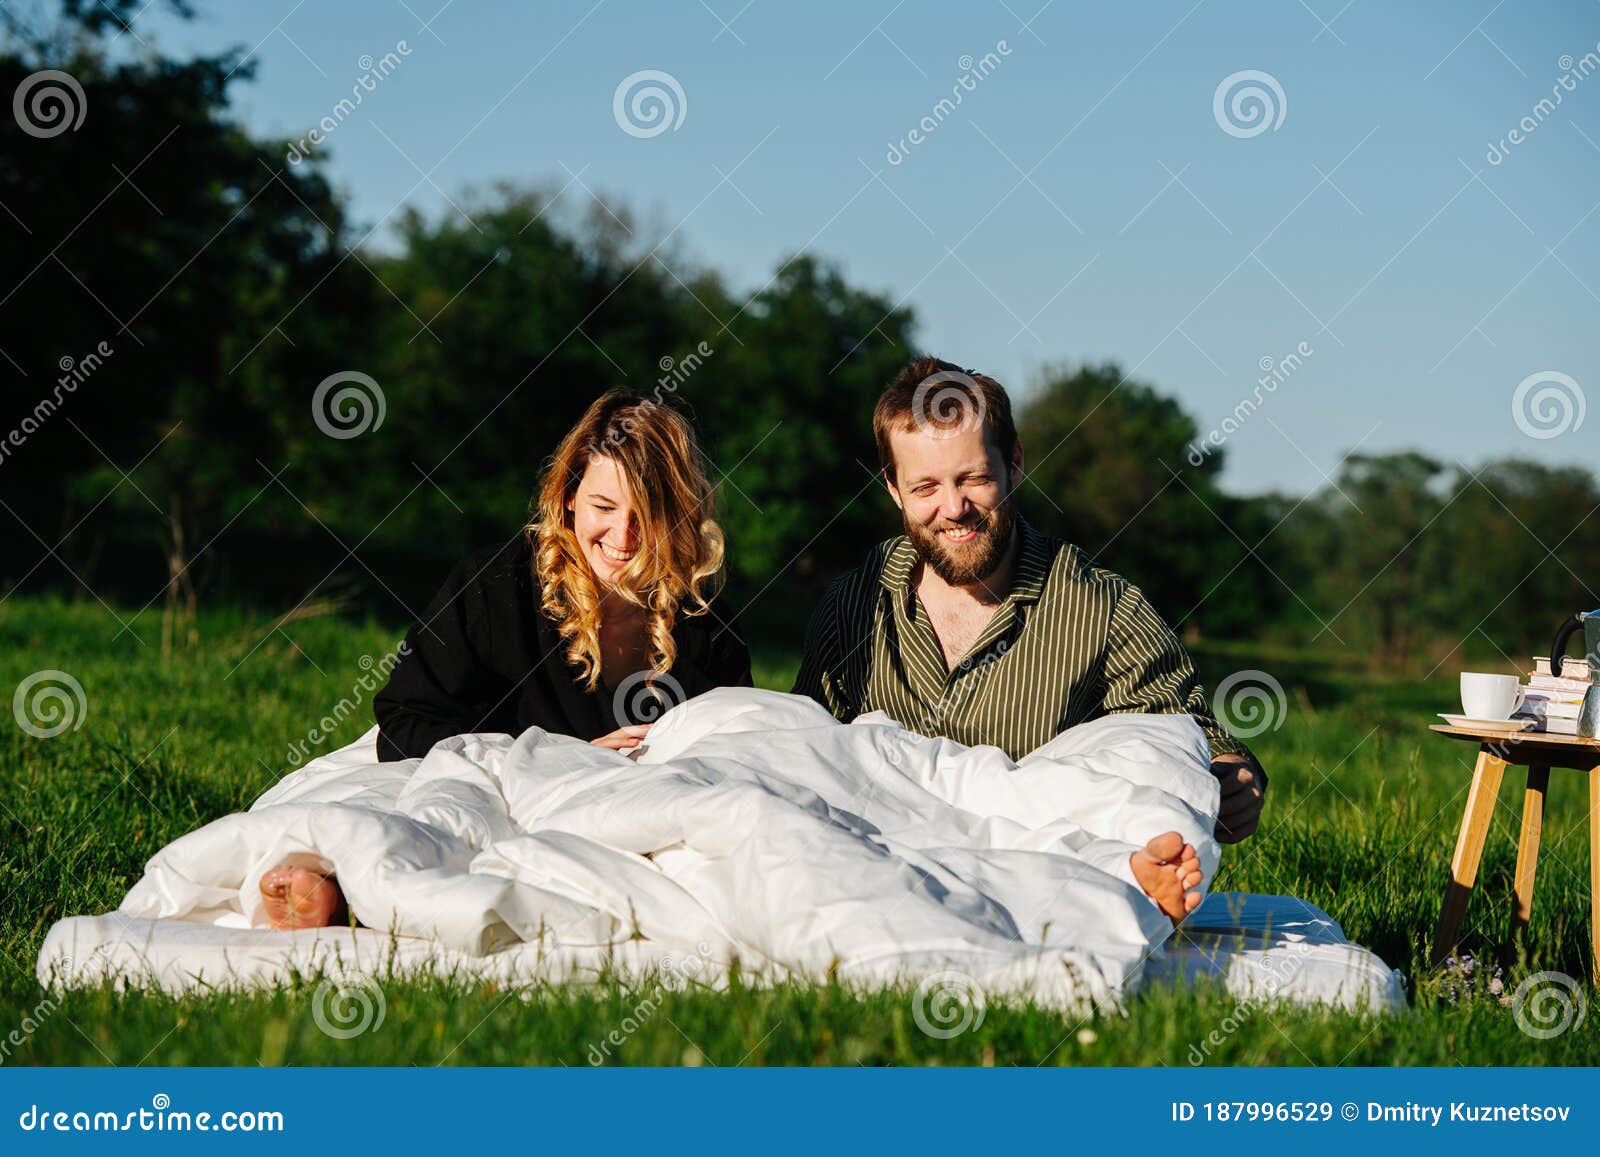 smiling groggy couple waking up from a nap in bed made outside in a countryside